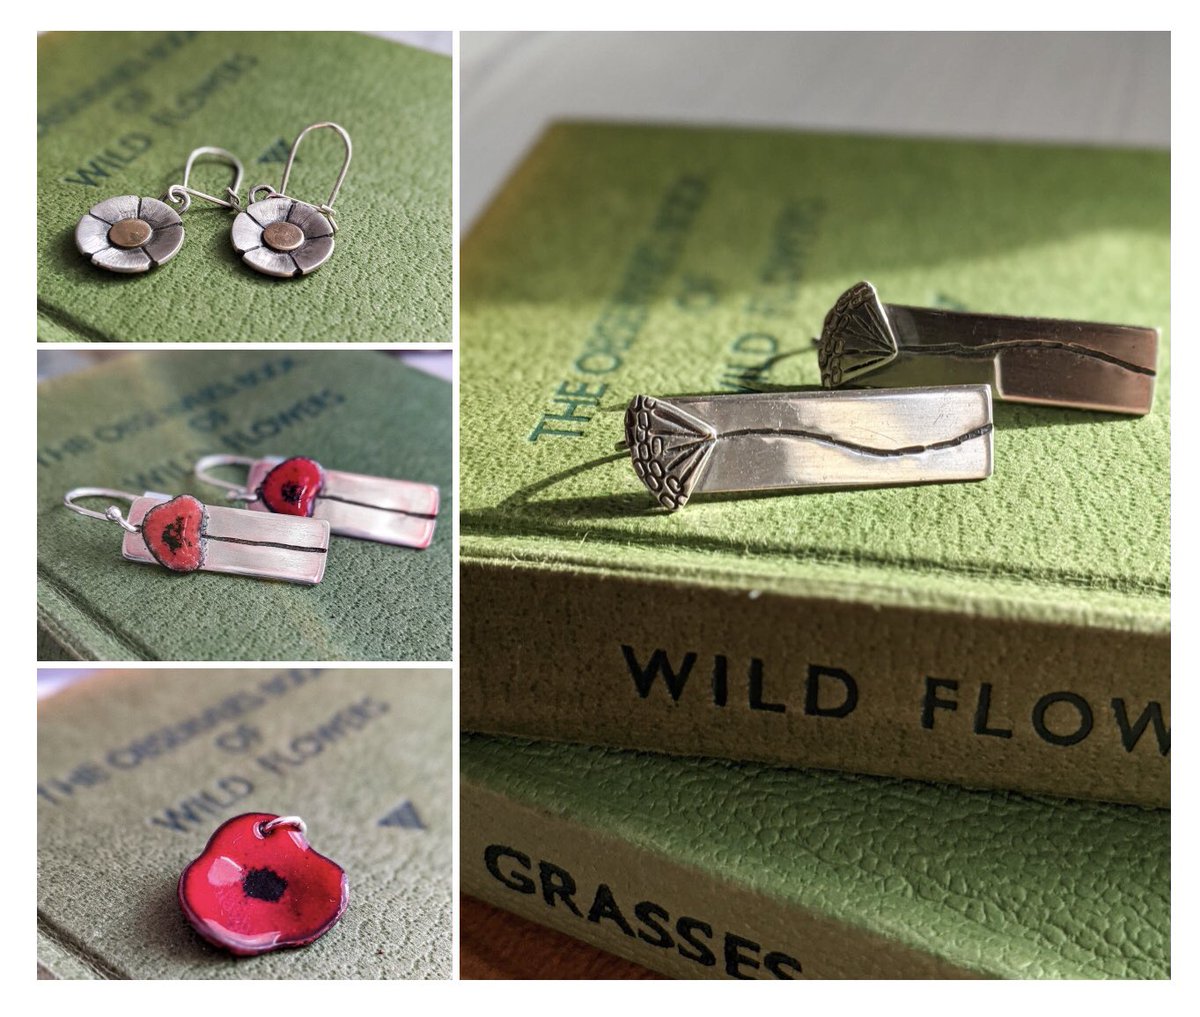 Finally got some decent light today, so took the opportunity to take some photographs of recent designs
#jewellery #AYearofArt #AmMaking #MadeInNorthumberland #silver #silverjewellery